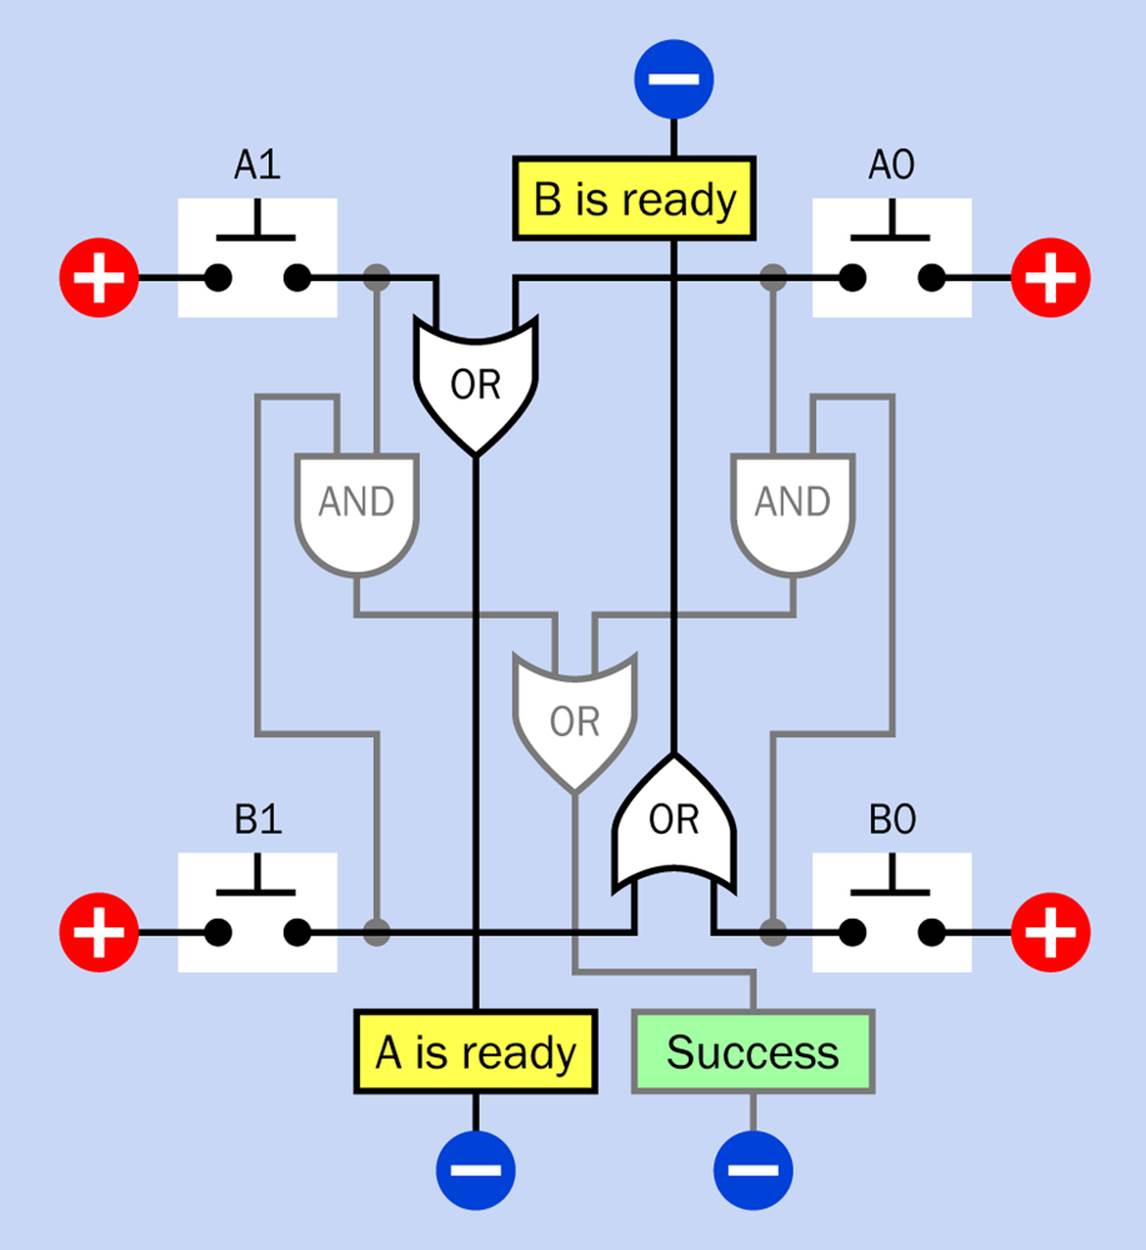 The previous two logic diagrams are shown here combined, sharing each pushbutton output between inputs on two separate logic gates. Unfortunately, combining multiple logic diagrams quickly results in complexity, which is difficult to interpret. In an effort to provide some clarity, connections from the previous logic diagram are shown here in gray.